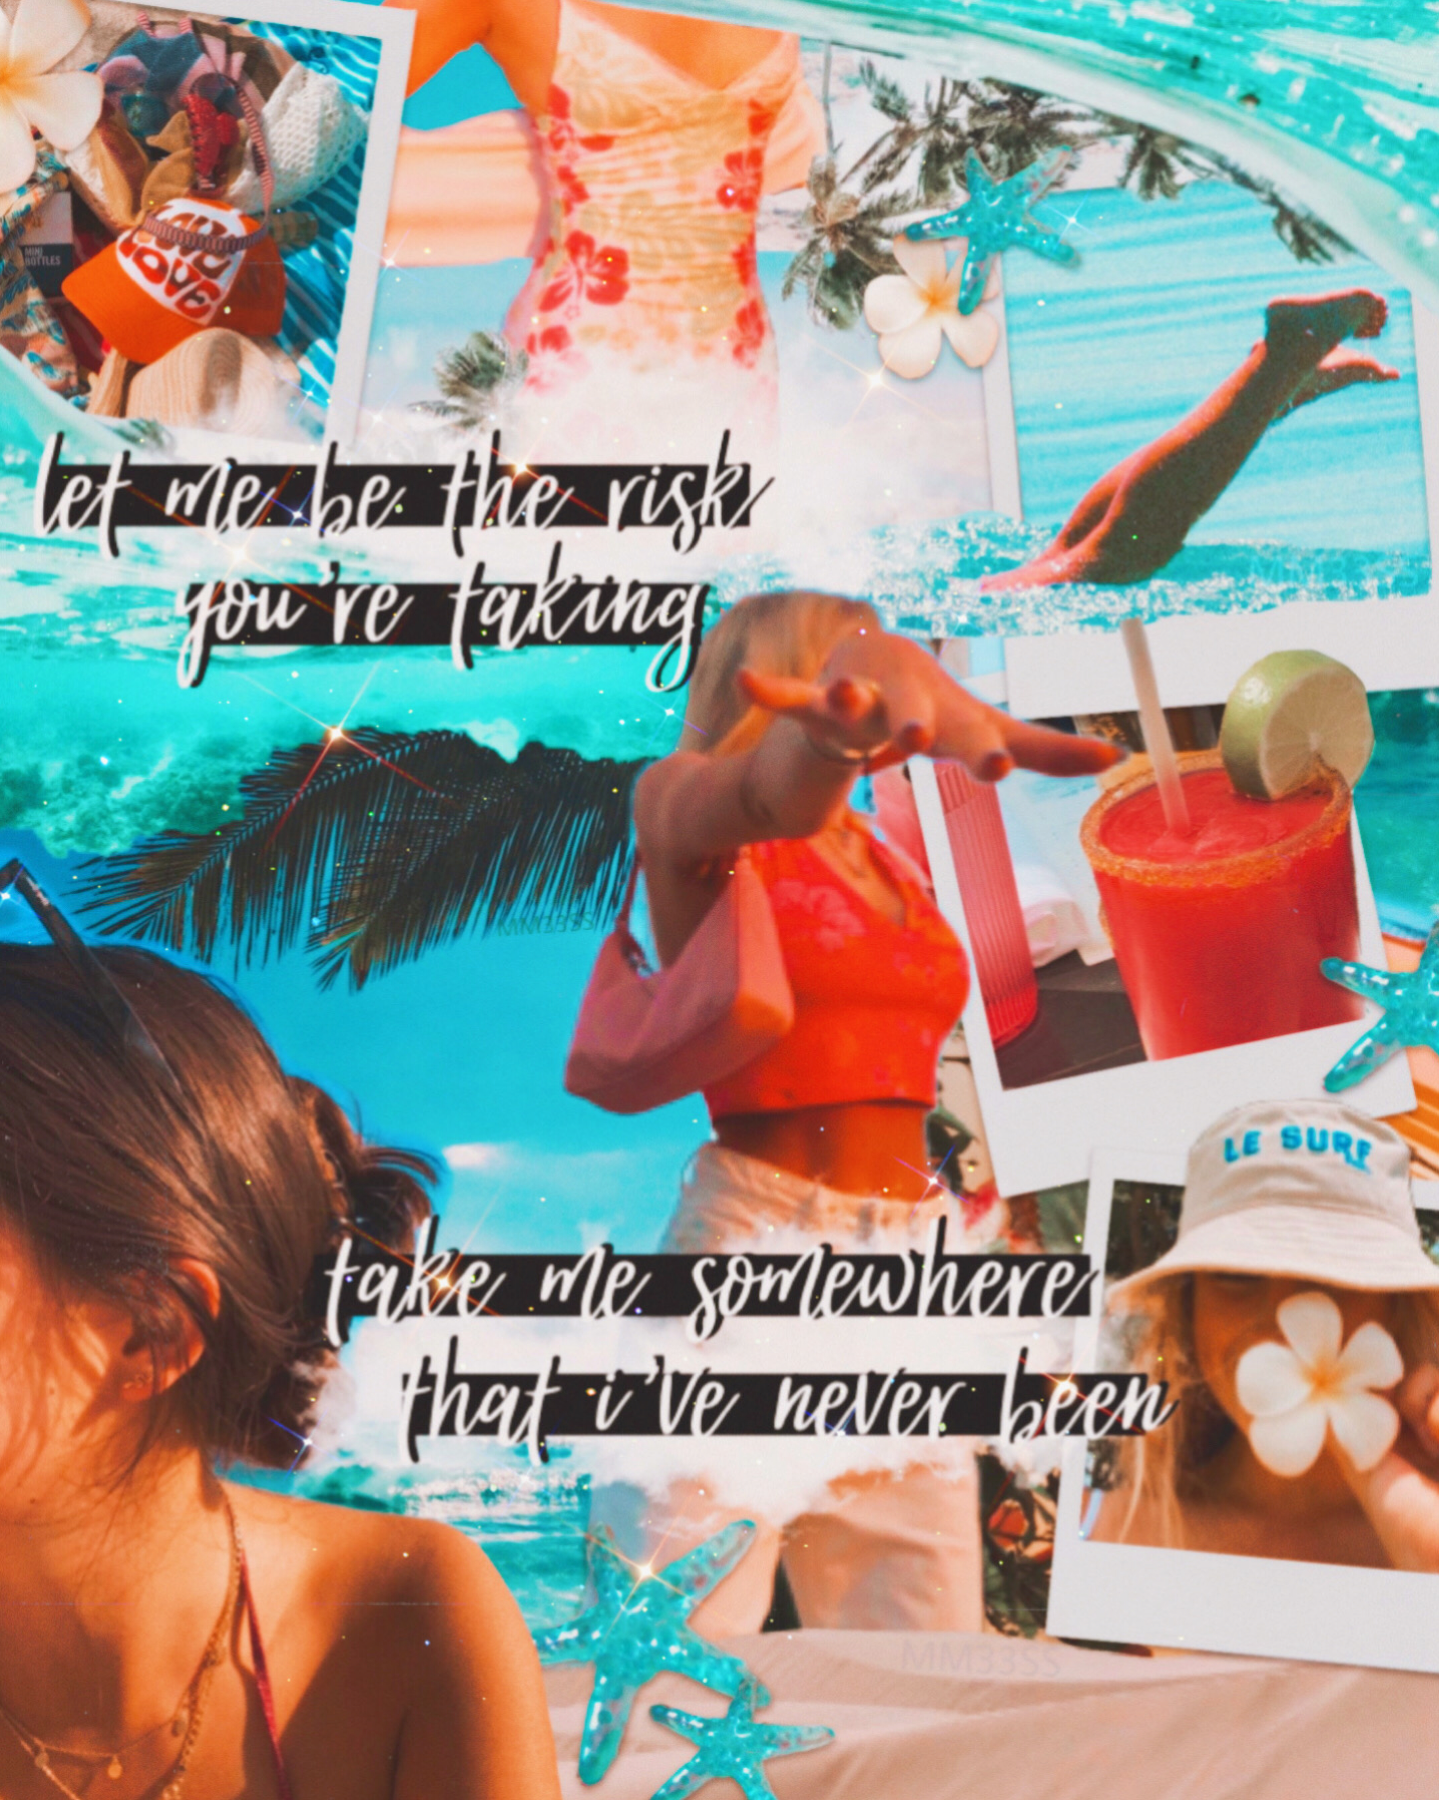 wildside / justice skolnik feat. sarah reeves / sept. 27, 2023

created for: daisyxxchloe contest

theme: coconut girl aesthetic + hidden word “love”

ummm yeahhh. no. 🙂

find the hidden word and win a prize i guess lol